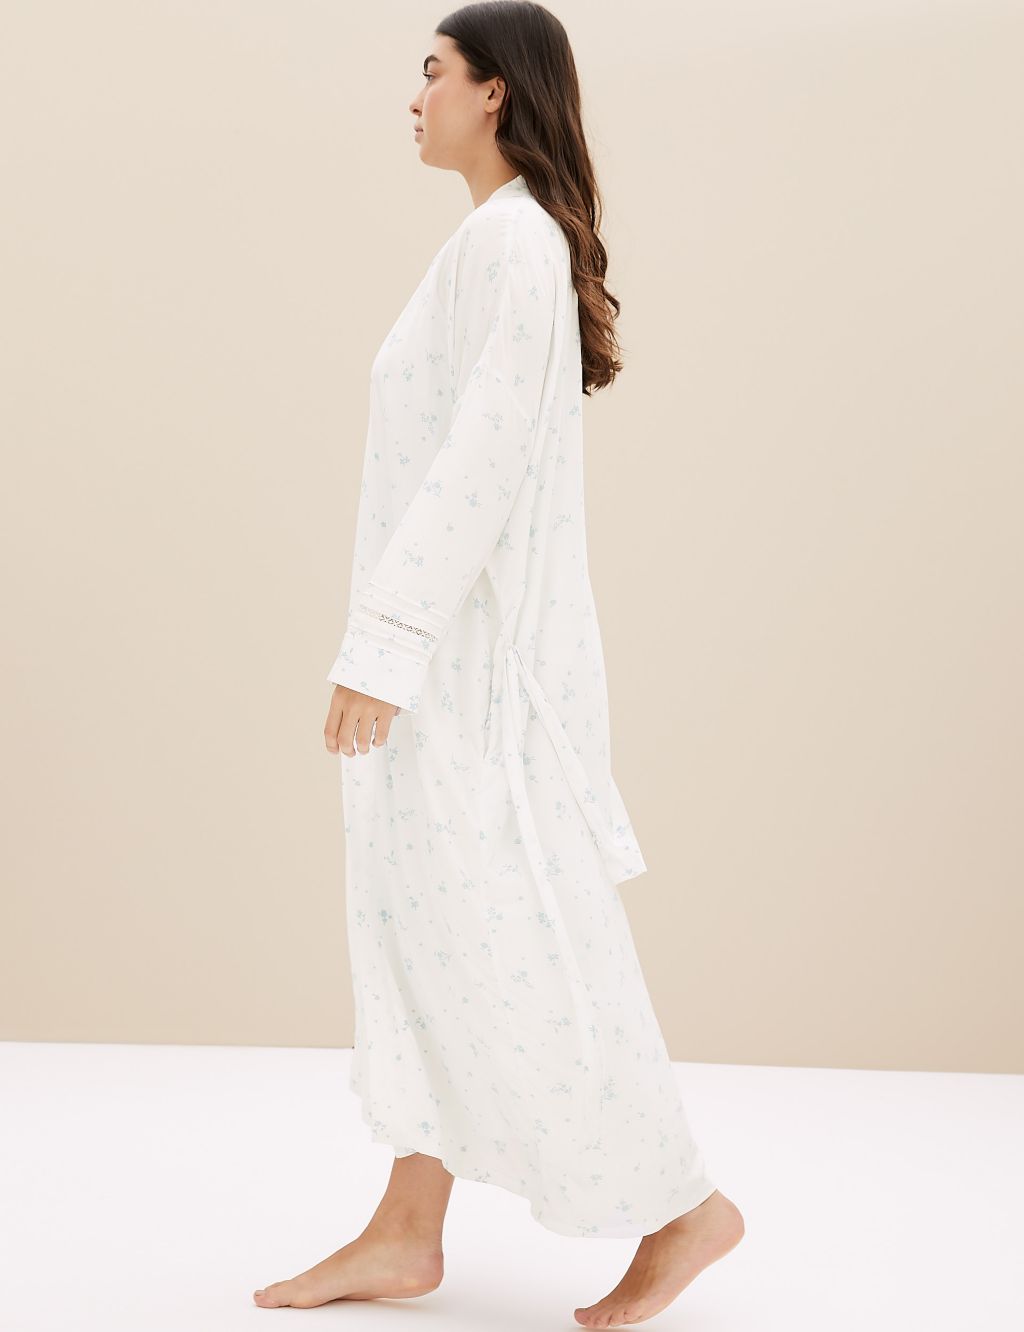 Floral Lace Insert Long Dressing Gown image 2